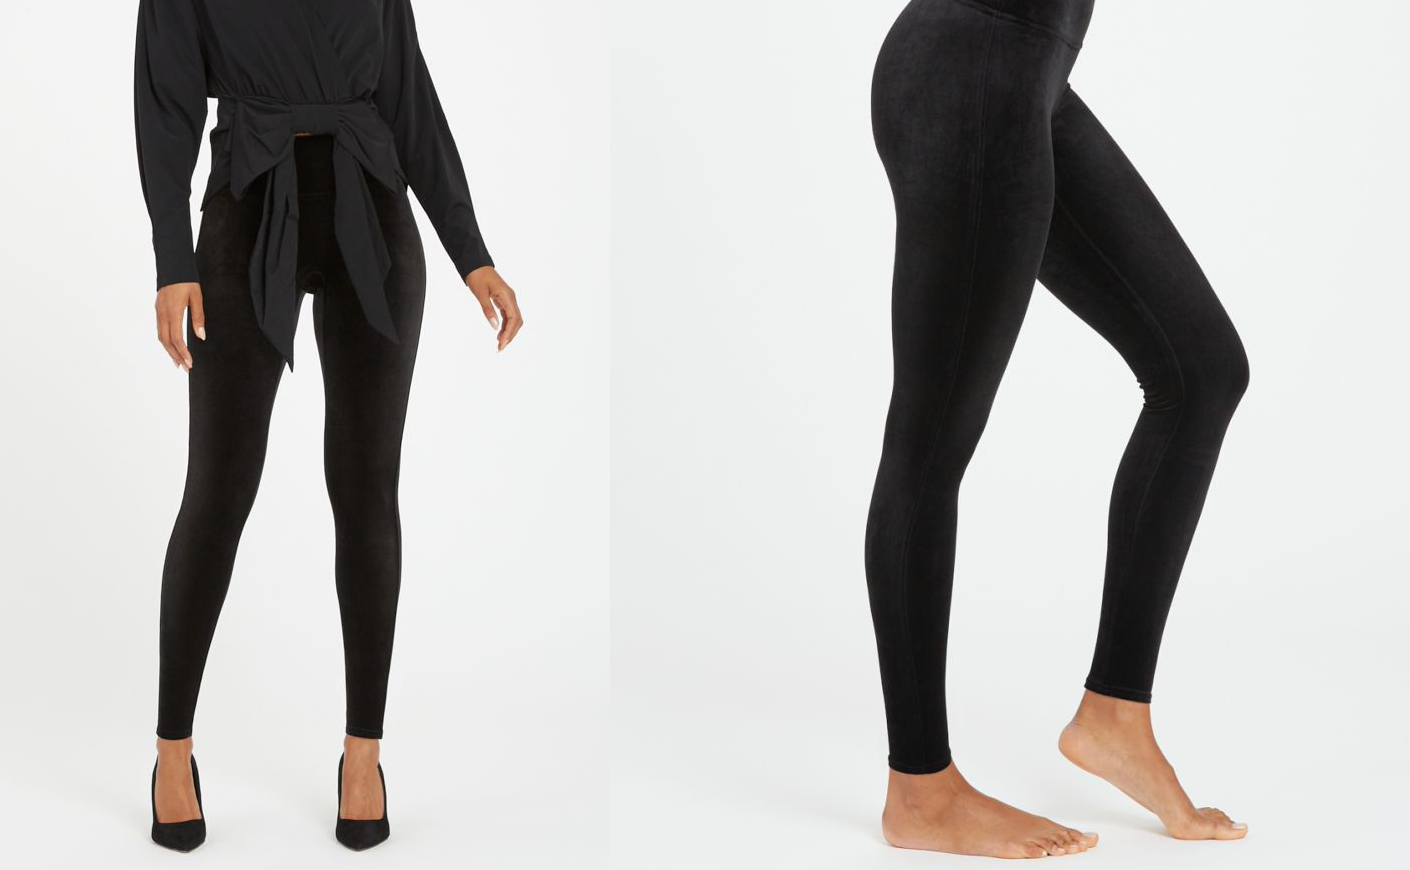 Shop These Warm and Cozy Bottoms to Stay Warm